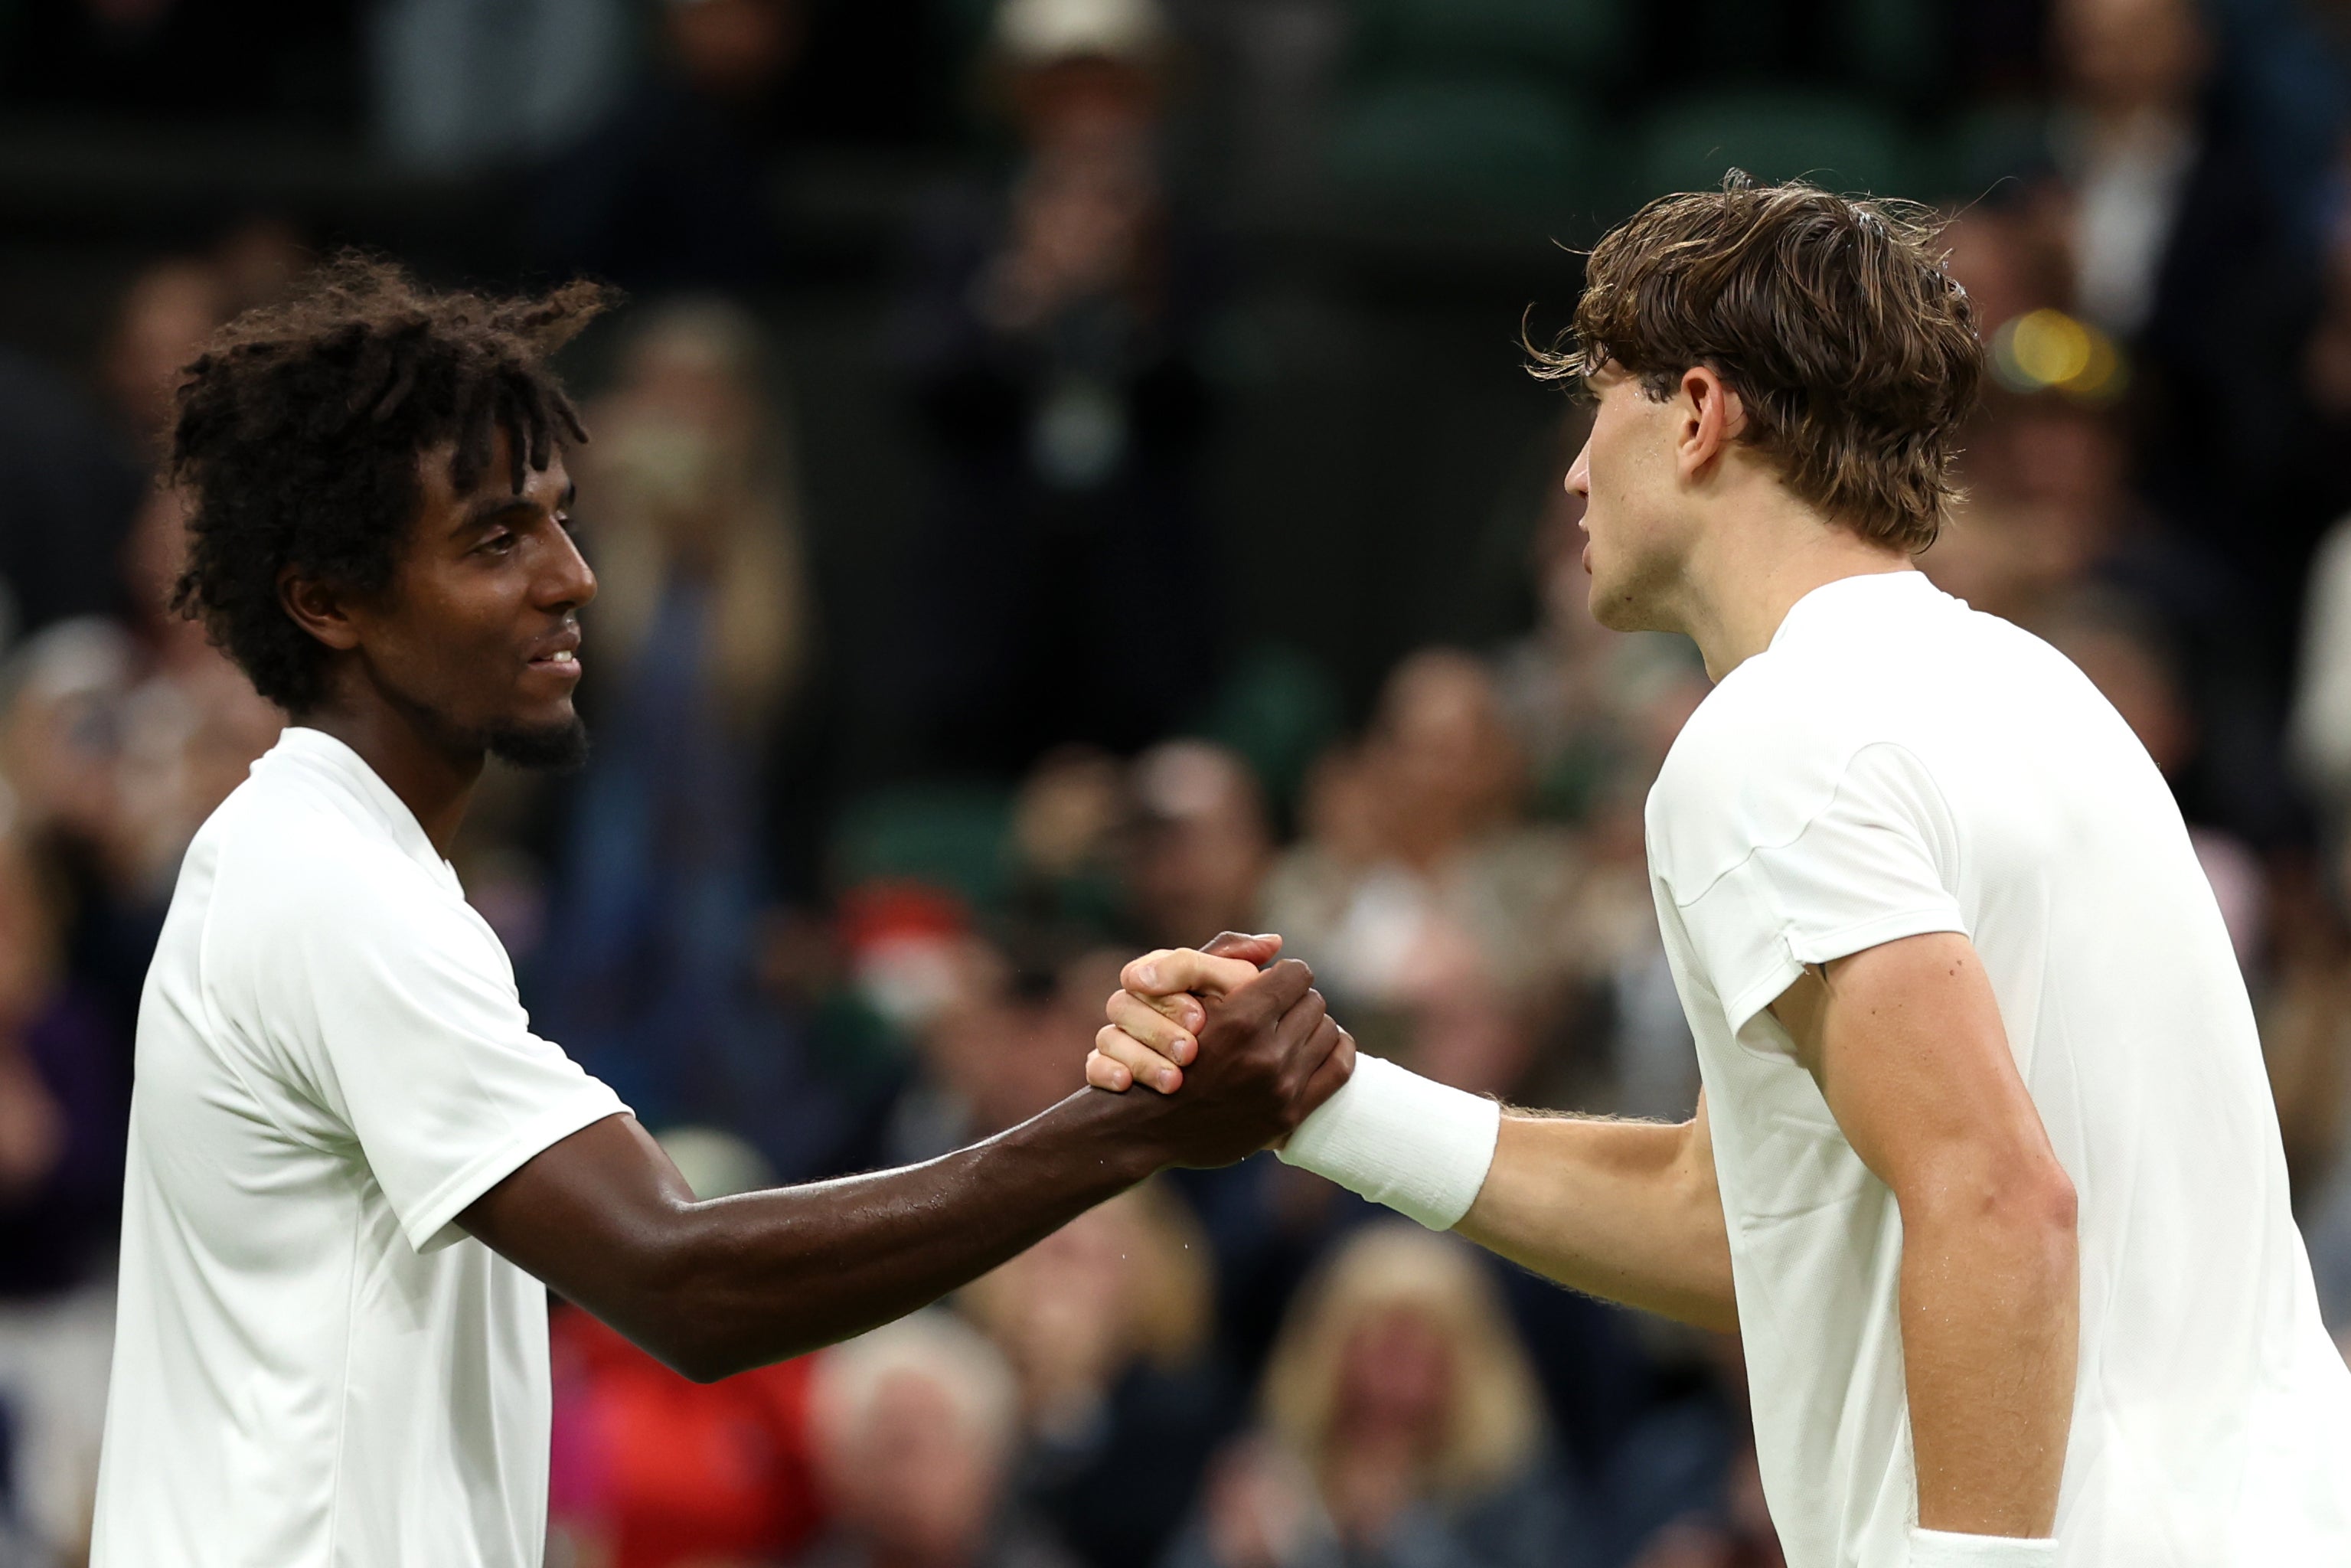 Draper shakes hands with Ymer as the match finished after 9pm